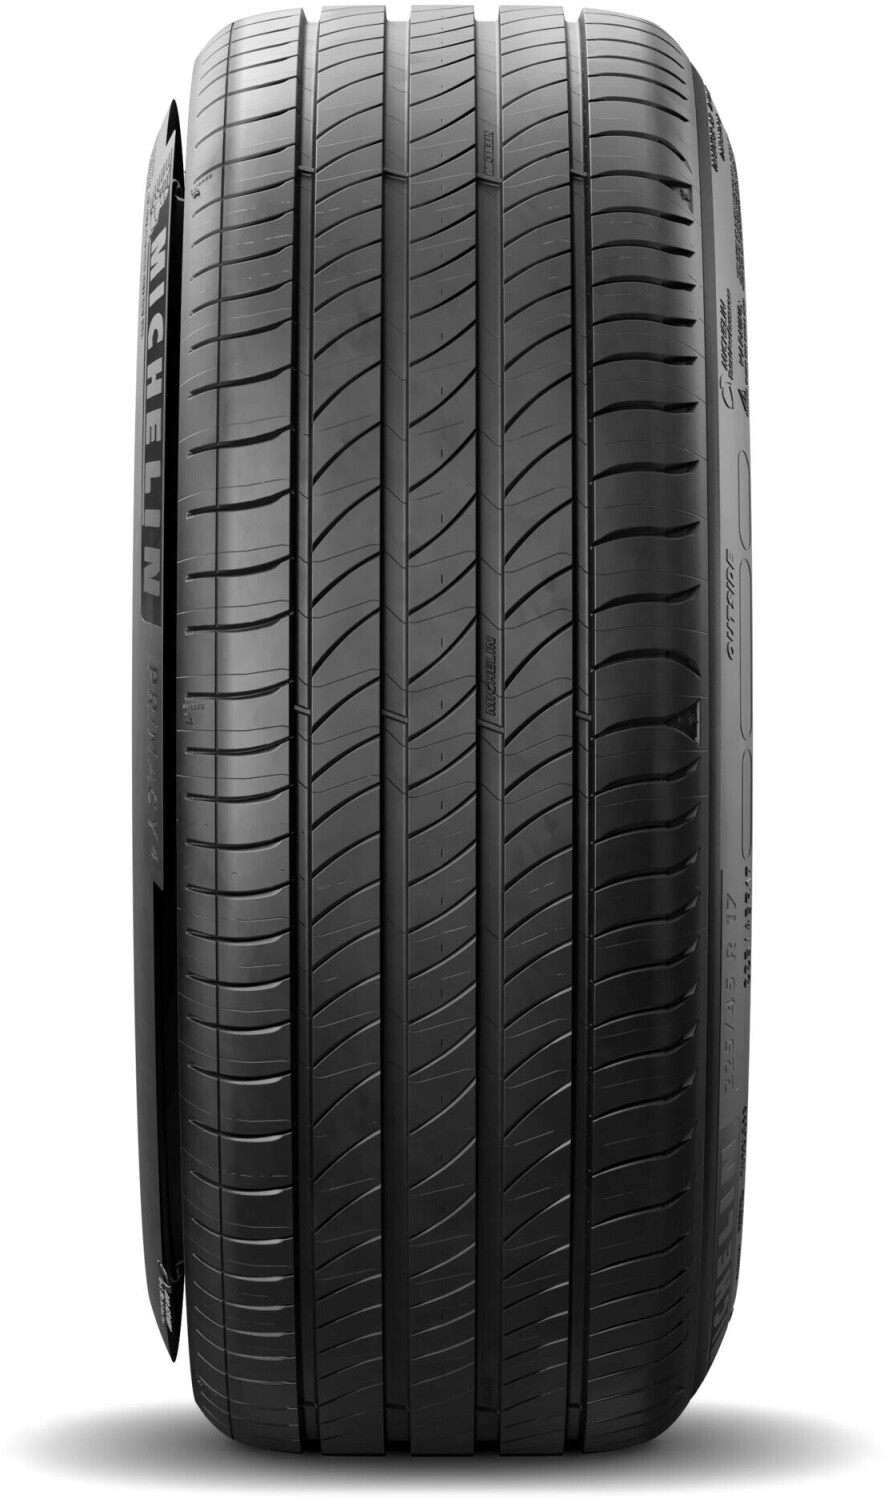 Buy Michelin Primacy 4 225/45 R17 94V XL S1 from £108.51 (Today) – Best  Deals on